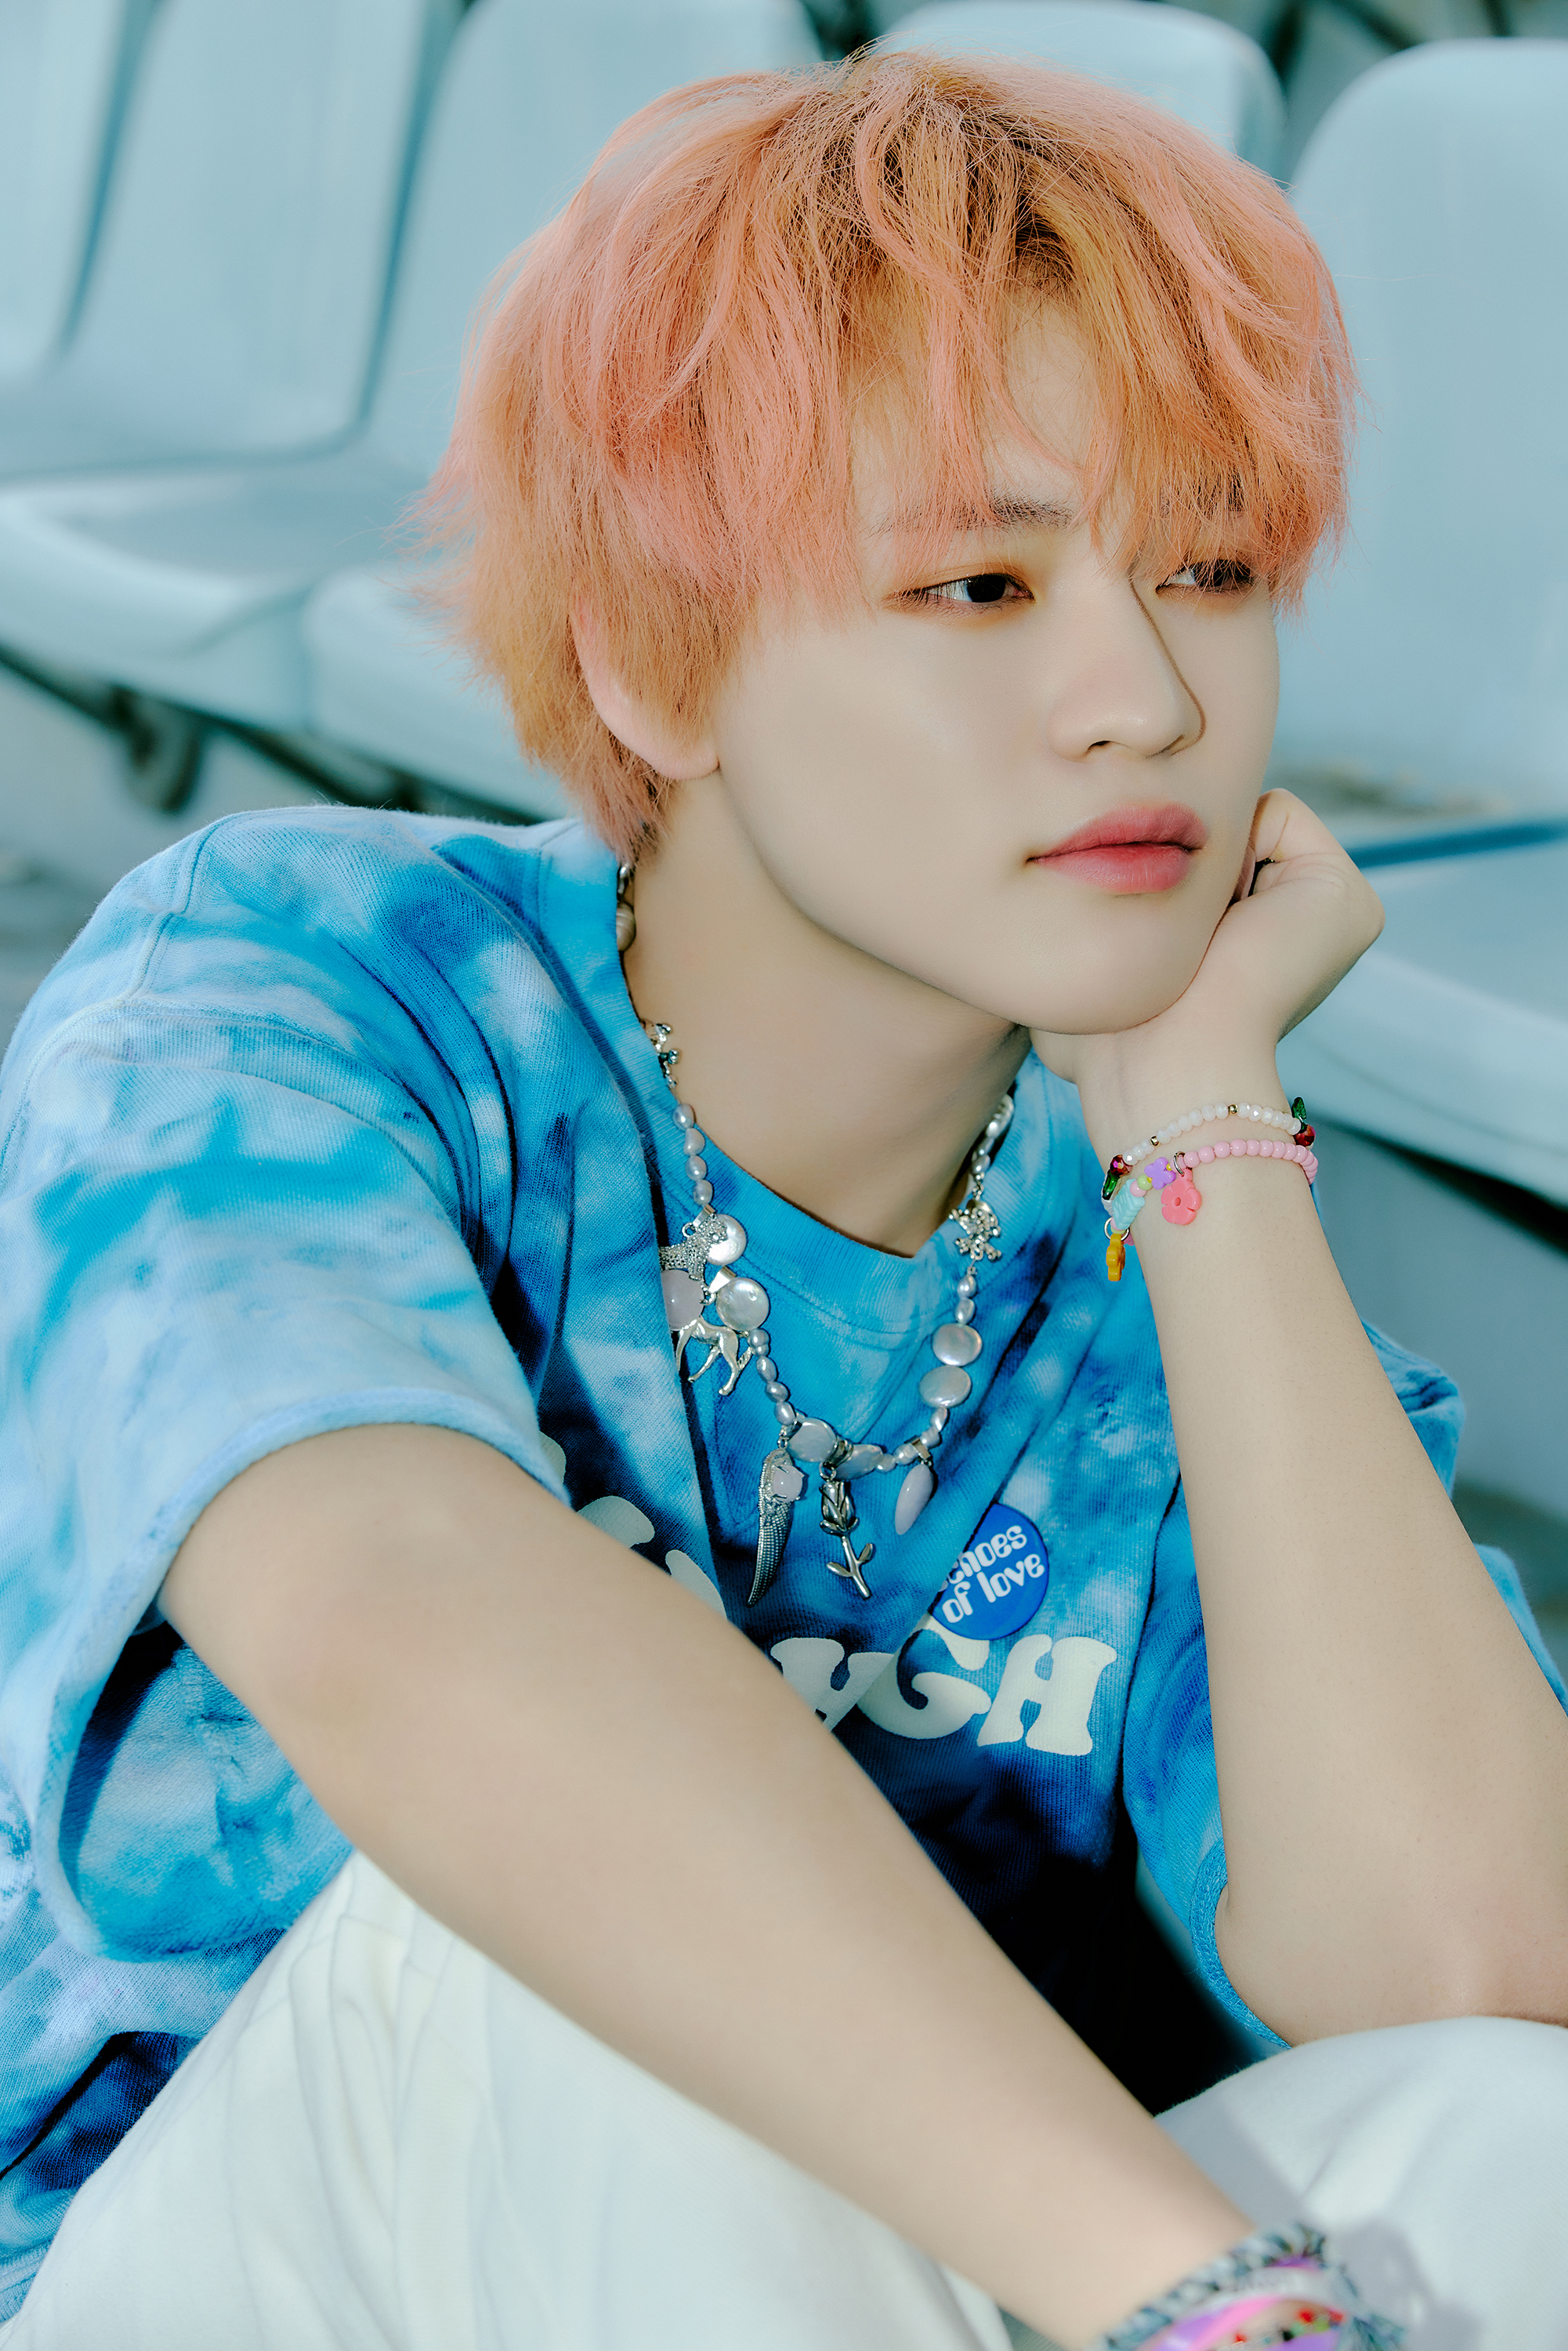 Detail Foto Chenle Nct Nomer 4